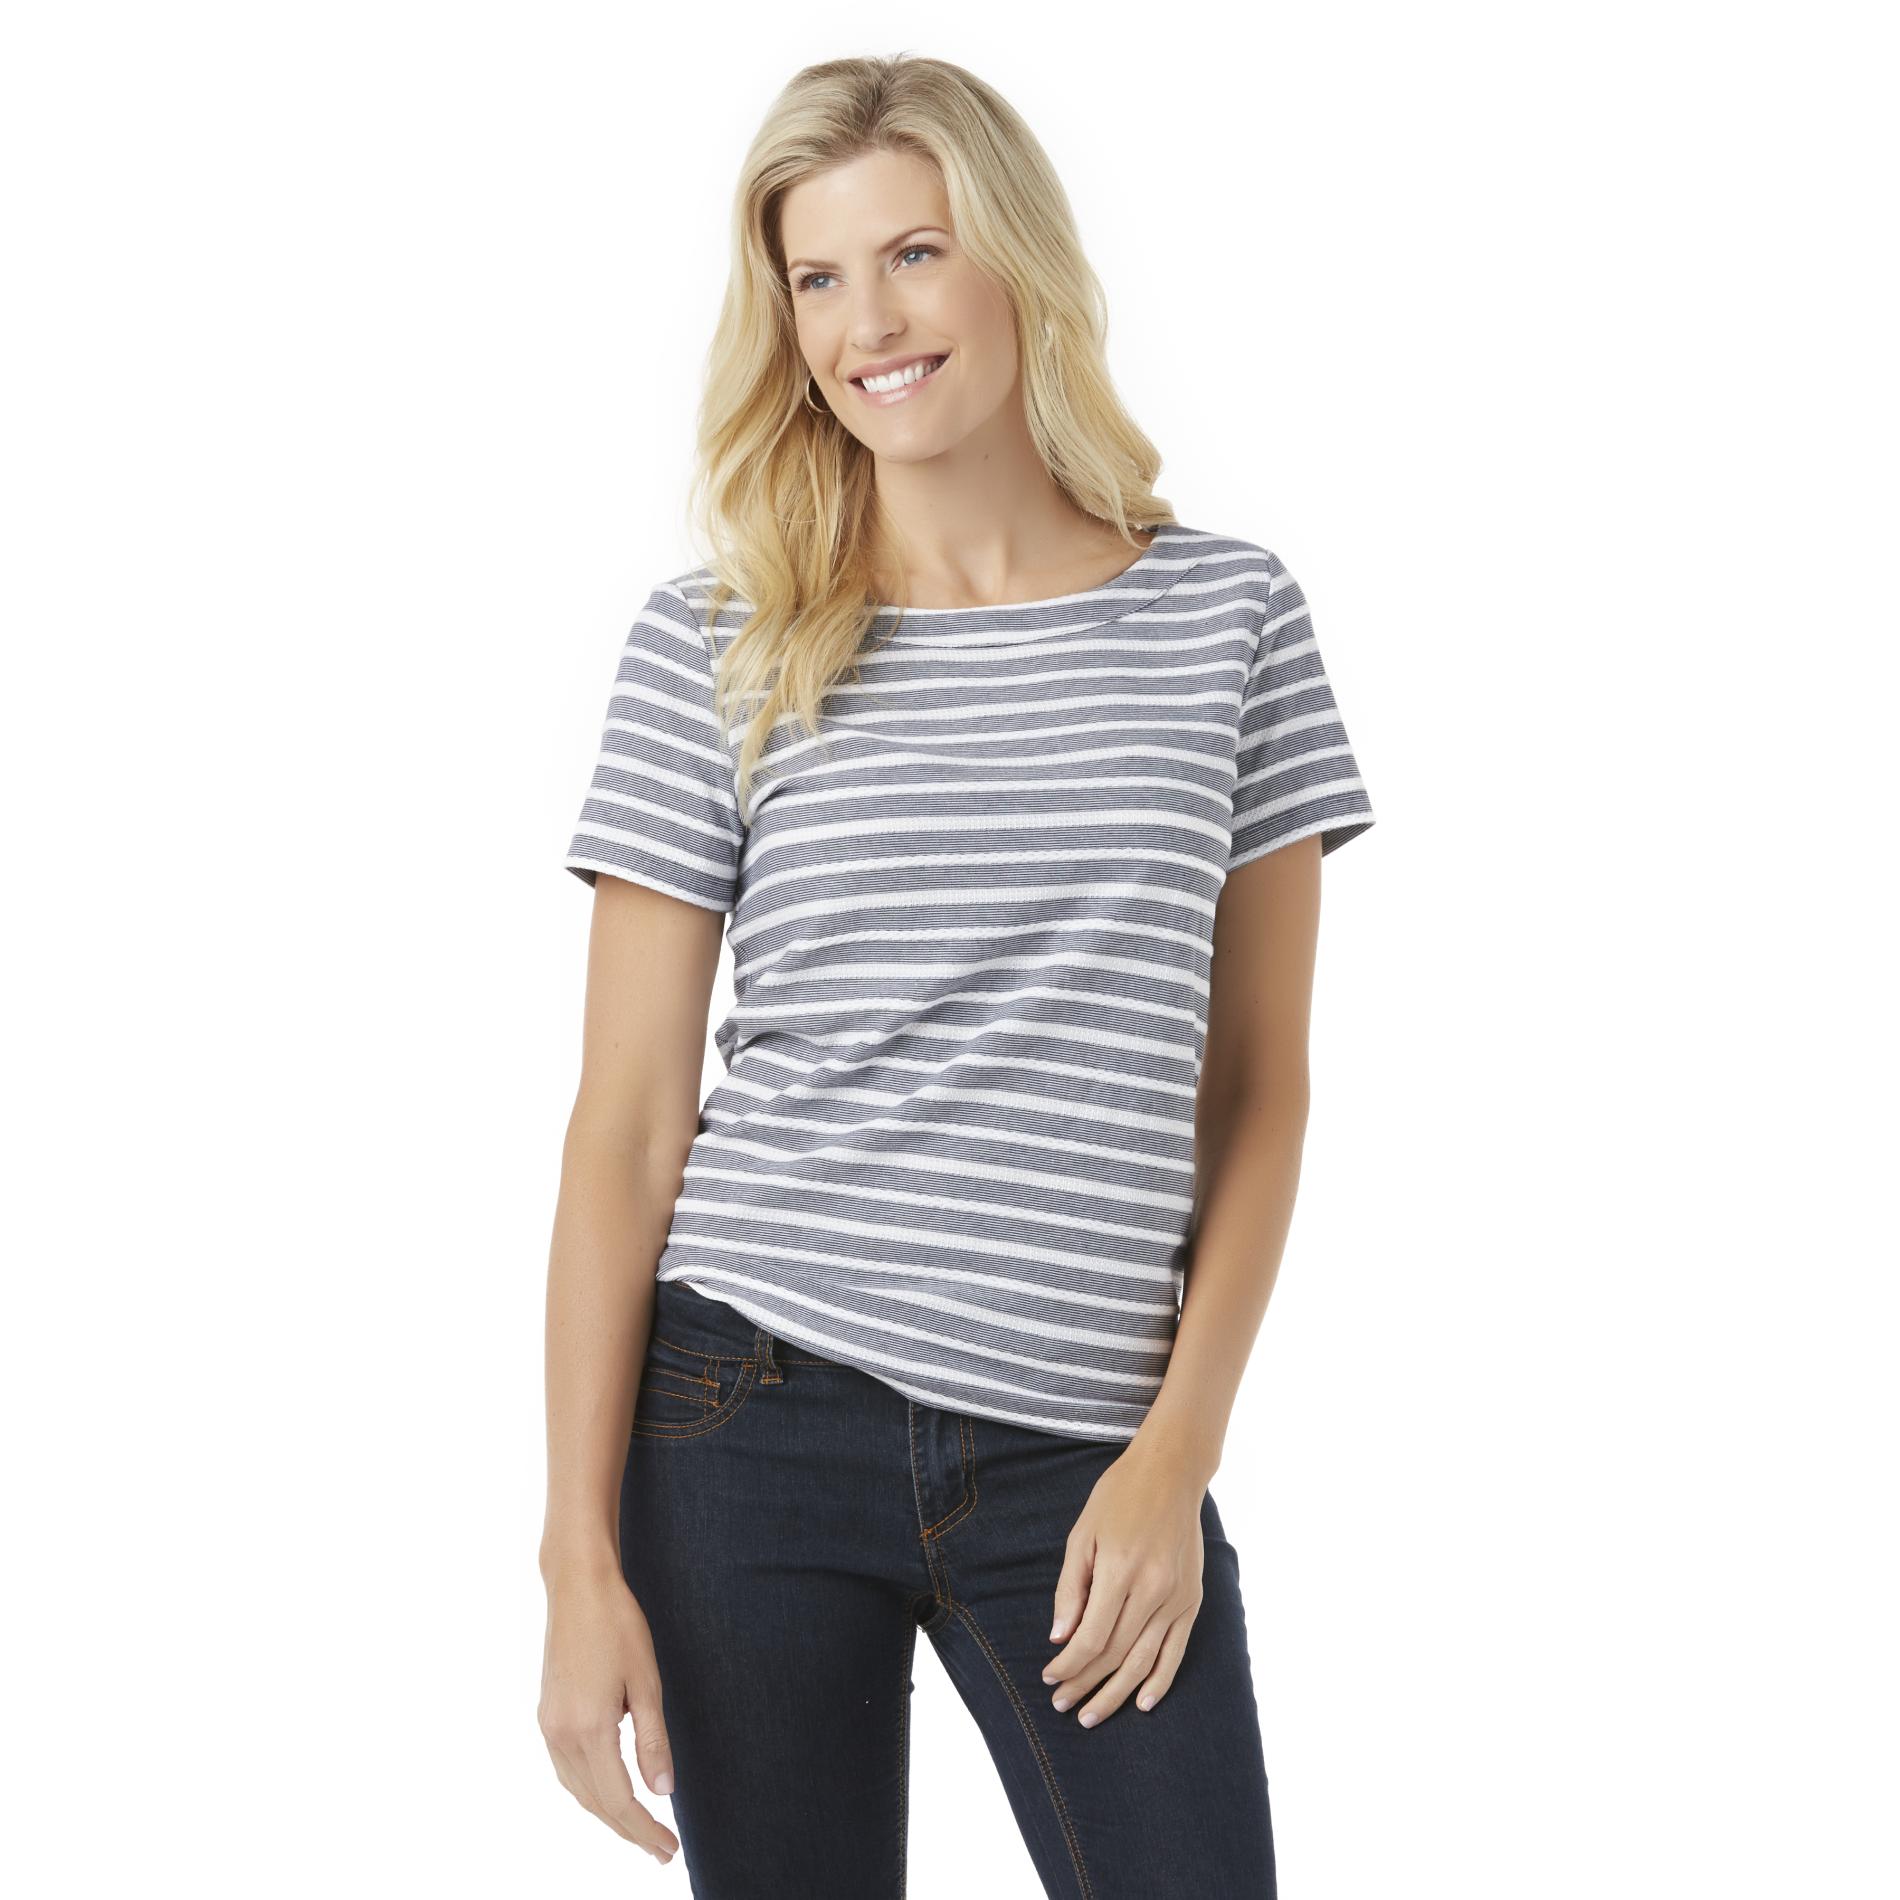 Basic Editions Women's Short-Sleeve Top - Striped